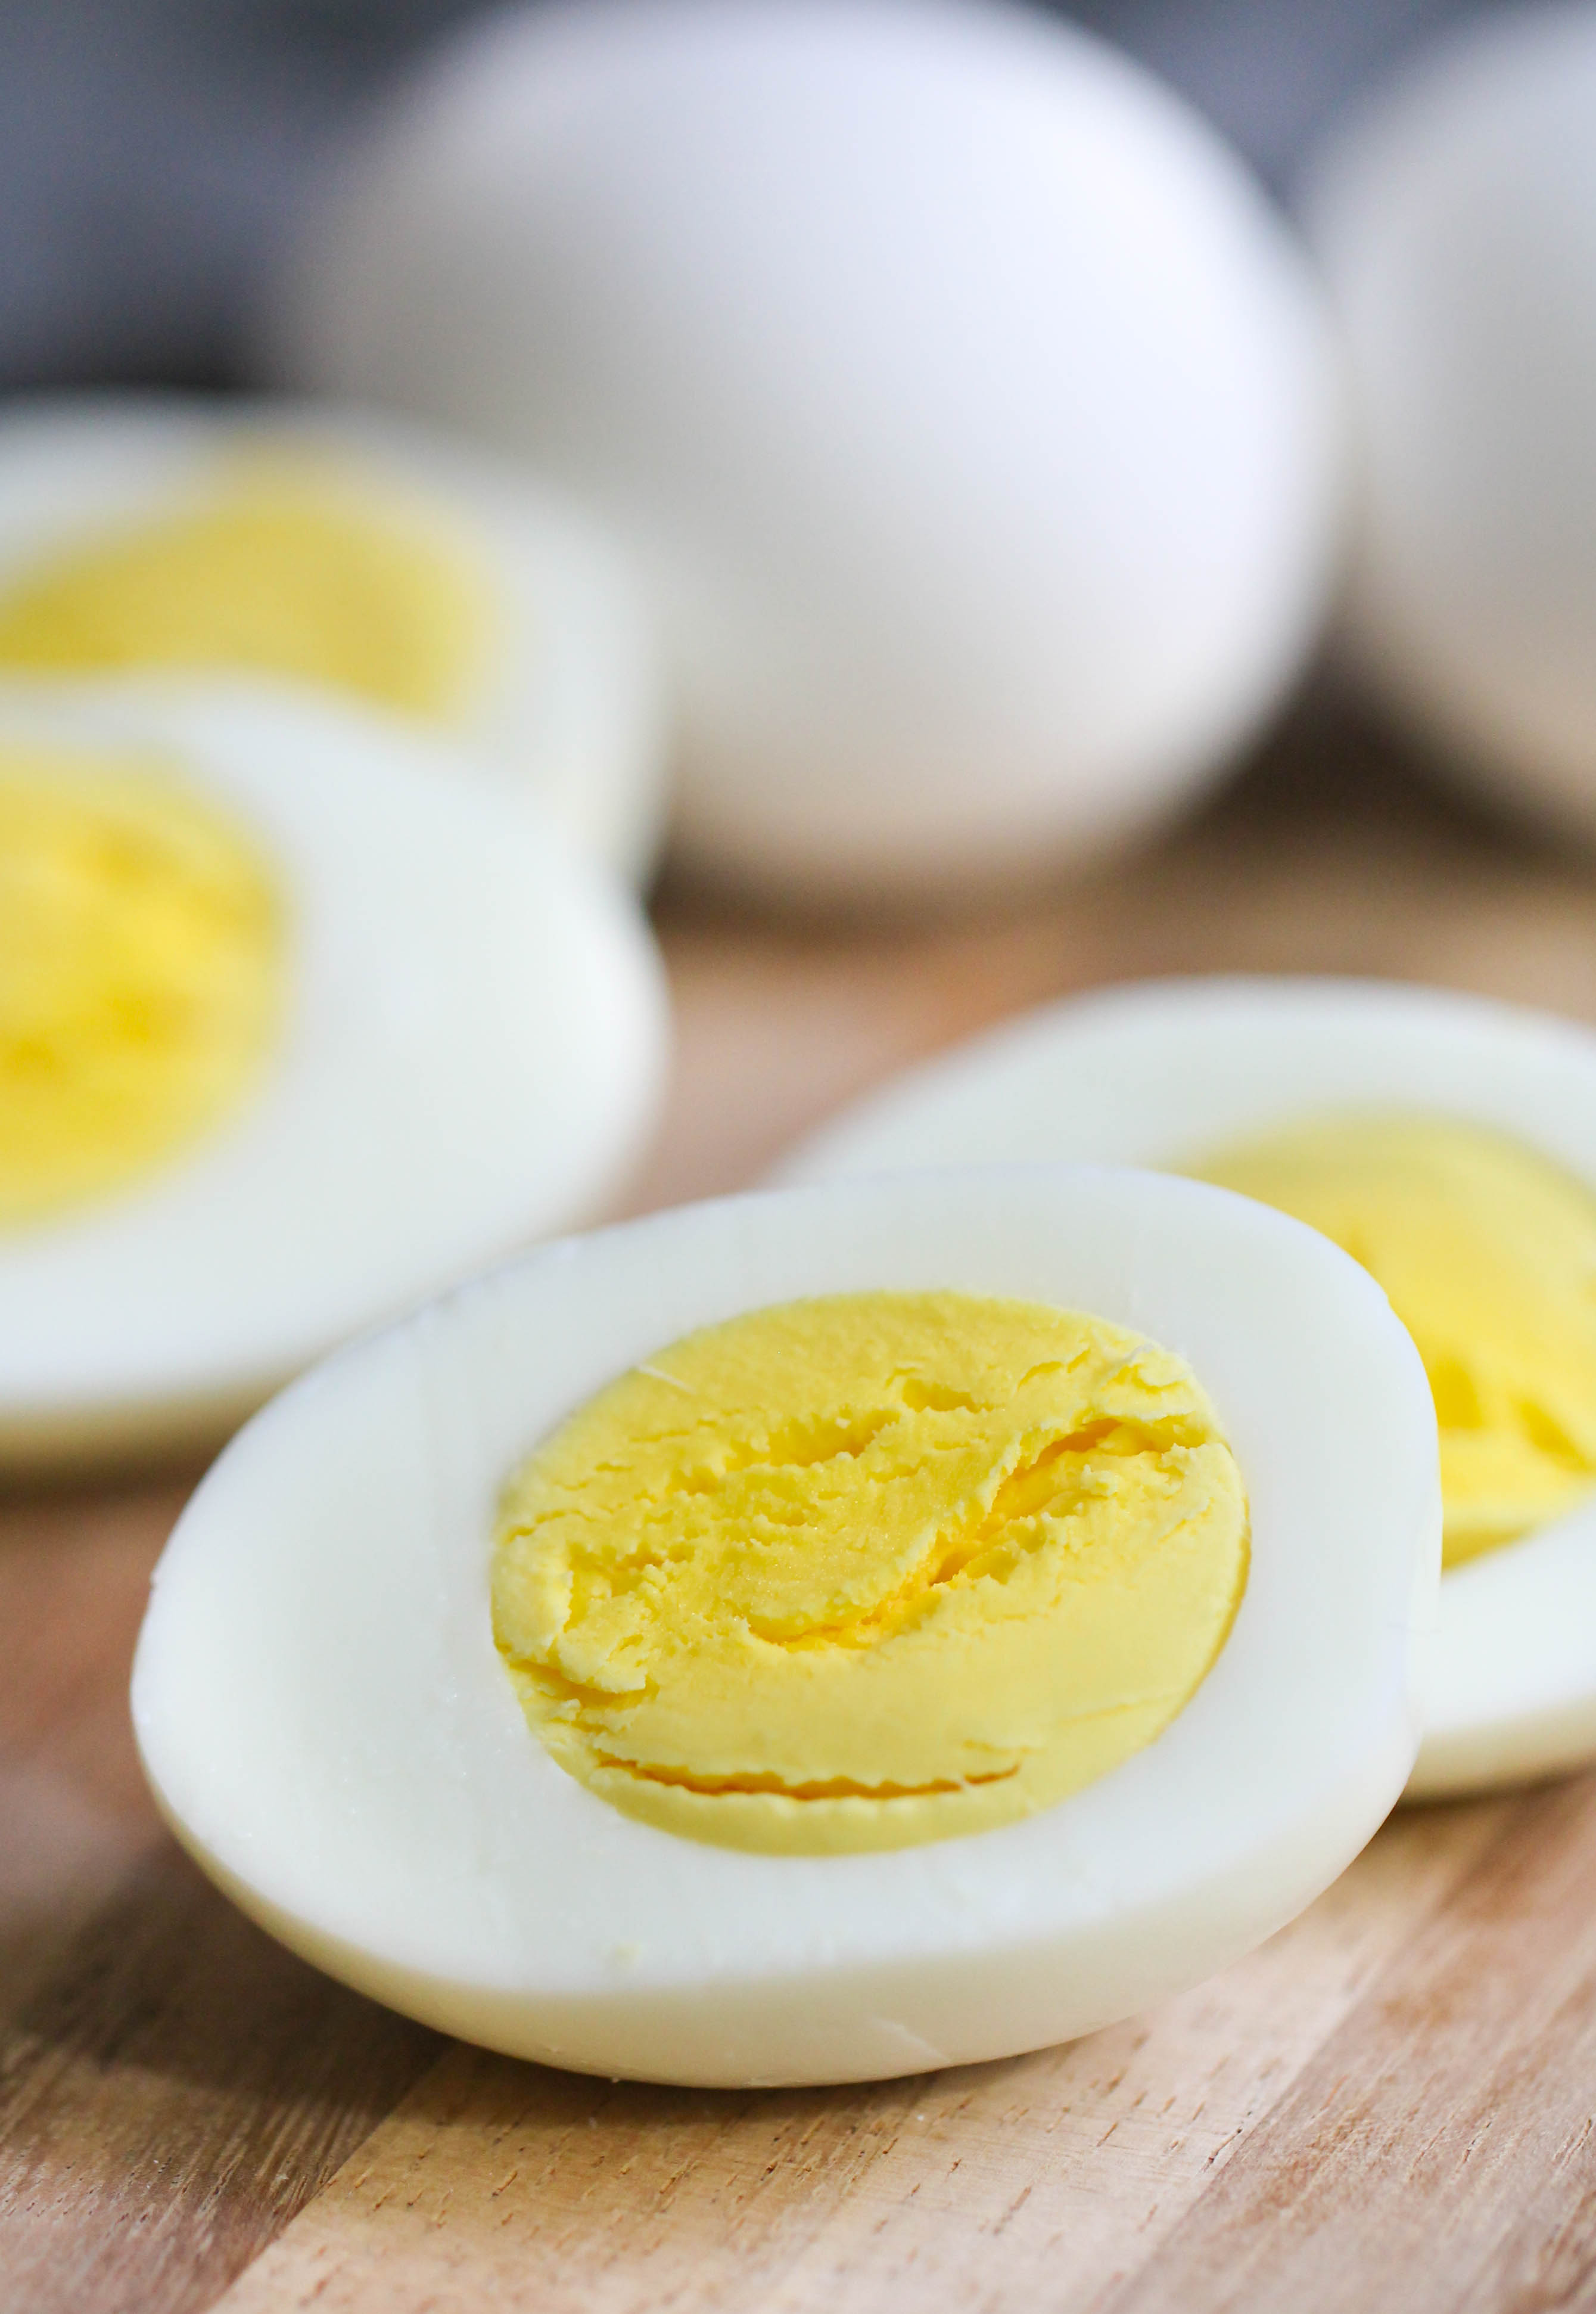 How To Cook Hard Boiled Eggs In The Instant Pot 5 5 5 Method